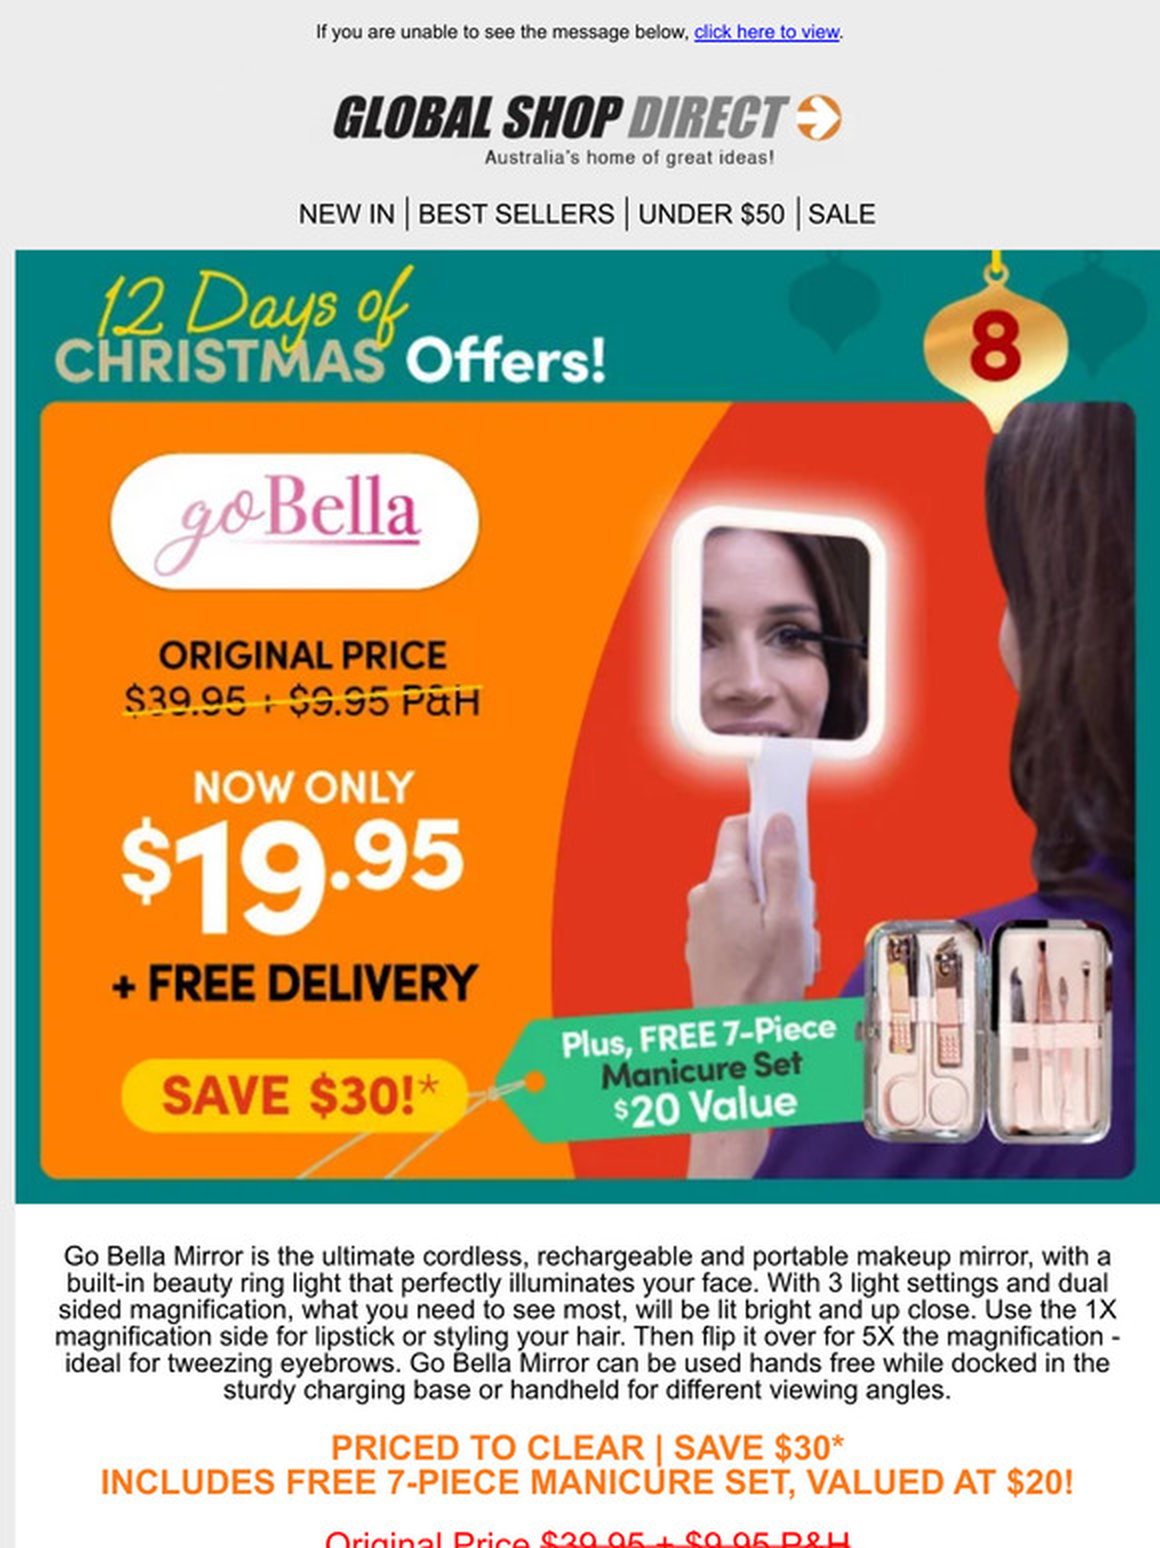 SAVE $30 on Go Bella Mirror - NOW $19.95 + Free Delivery